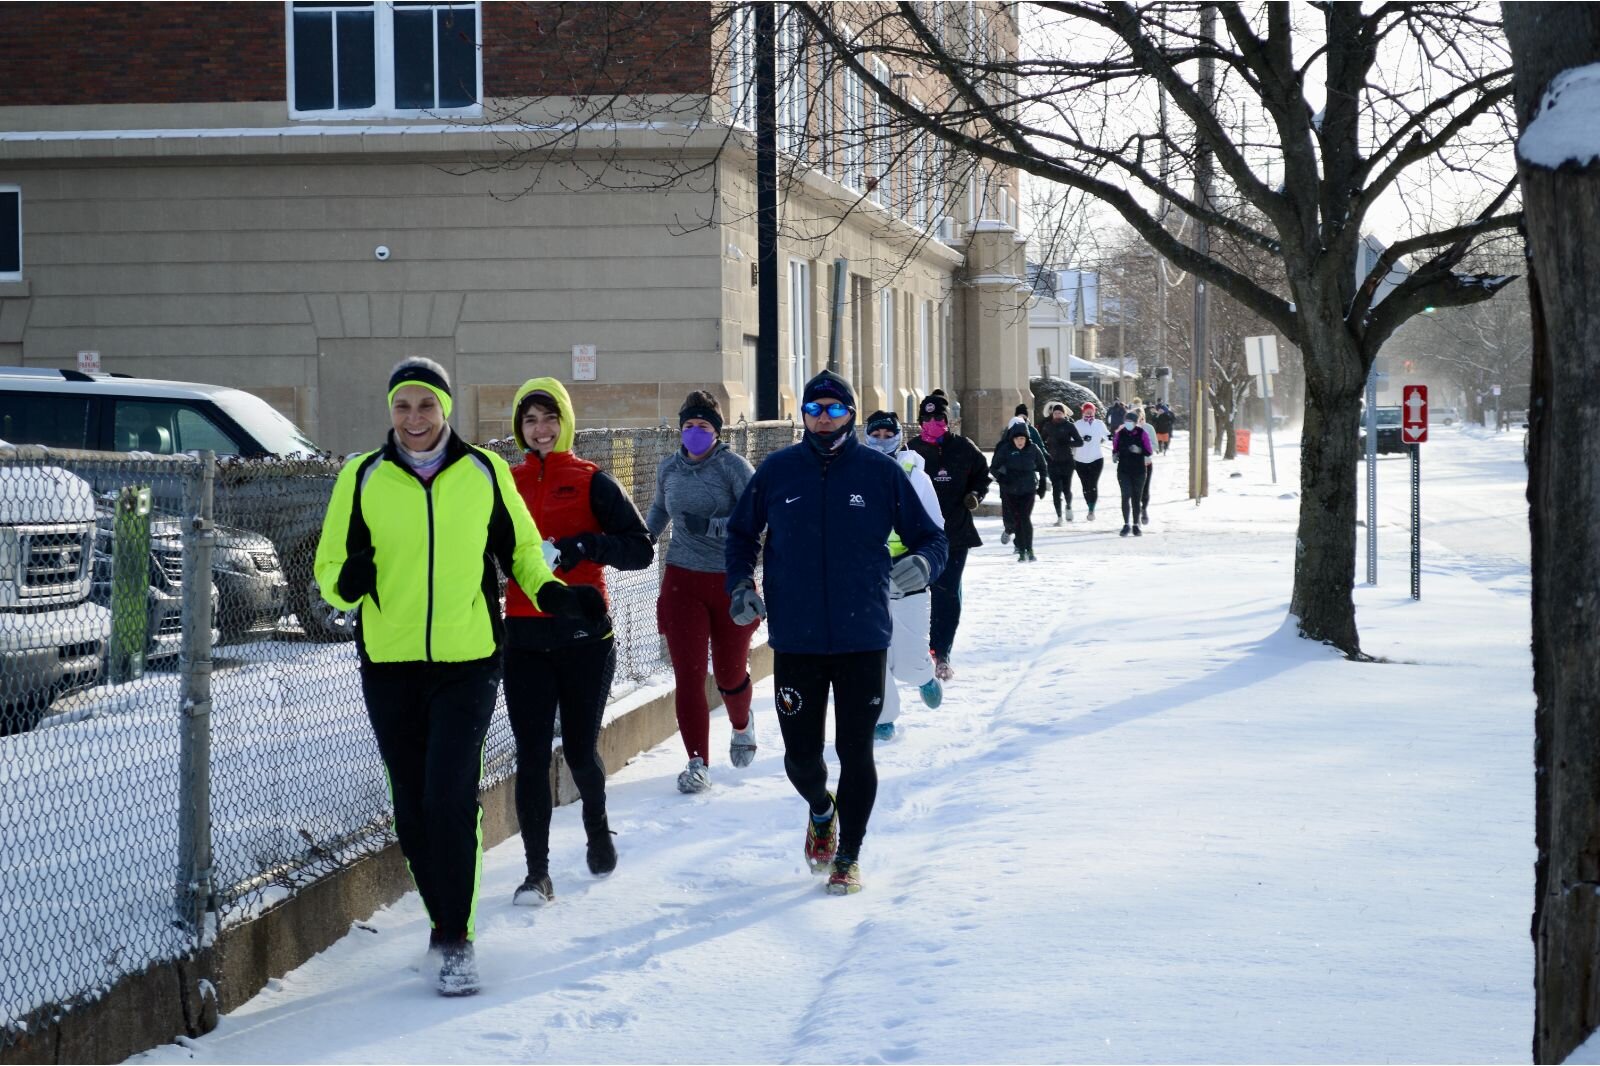 Run Kalamazoo's Run Camp took place on a frigid Saturday Morning, March 12. Runners left Chenery Auditorium for a 4.5 mile route to the Winchell neighborhood and back.